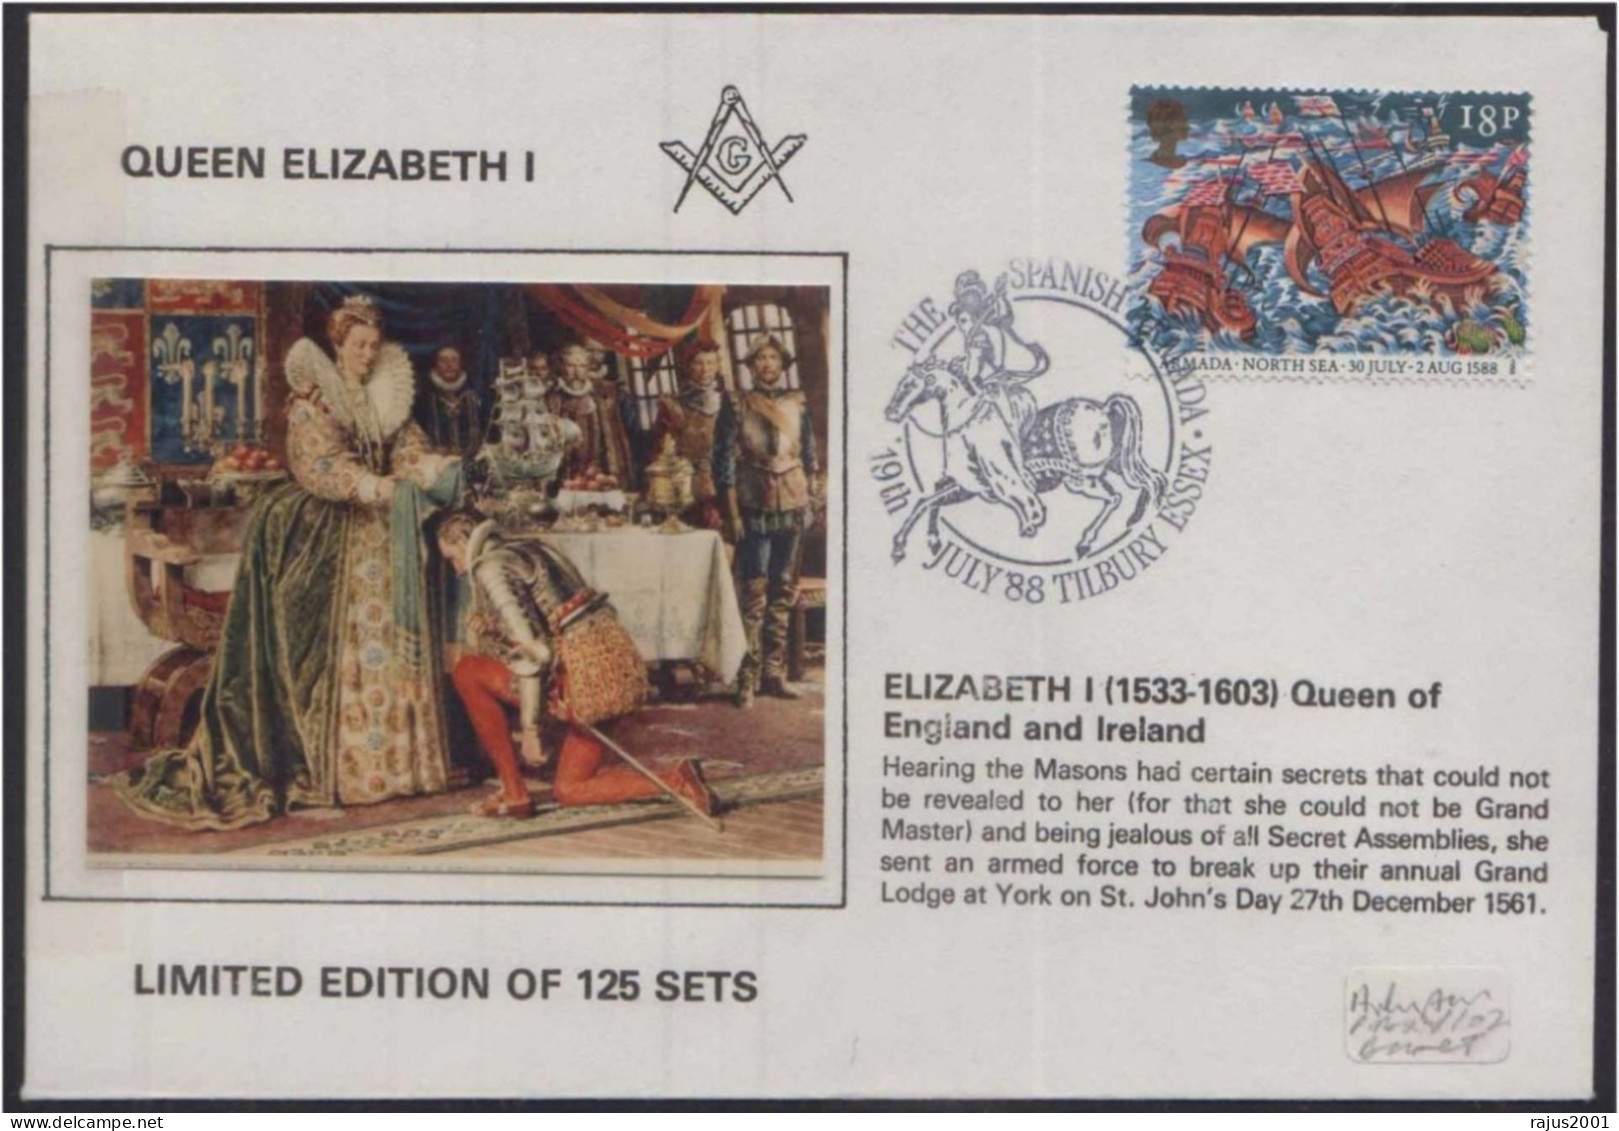 Queen Elizabeth I Sent Armed Forces To Break Masonic Meeting At Grand Lodge At York Freemasonry Limited Edition Cover - Freemasonry